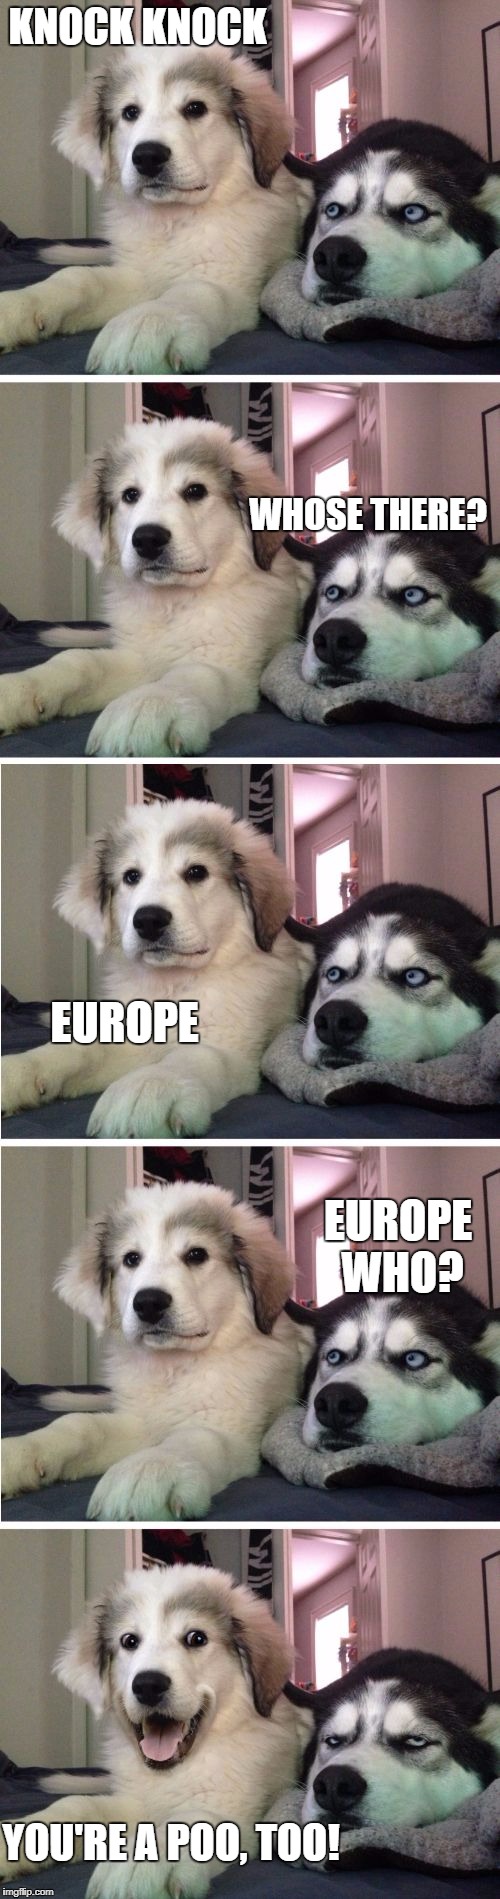 Knock Knock Dogs | KNOCK KNOCK; WHOSE THERE? EUROPE; EUROPE WHO? YOU'RE A POO, TOO! | image tagged in knock knock dogs | made w/ Imgflip meme maker